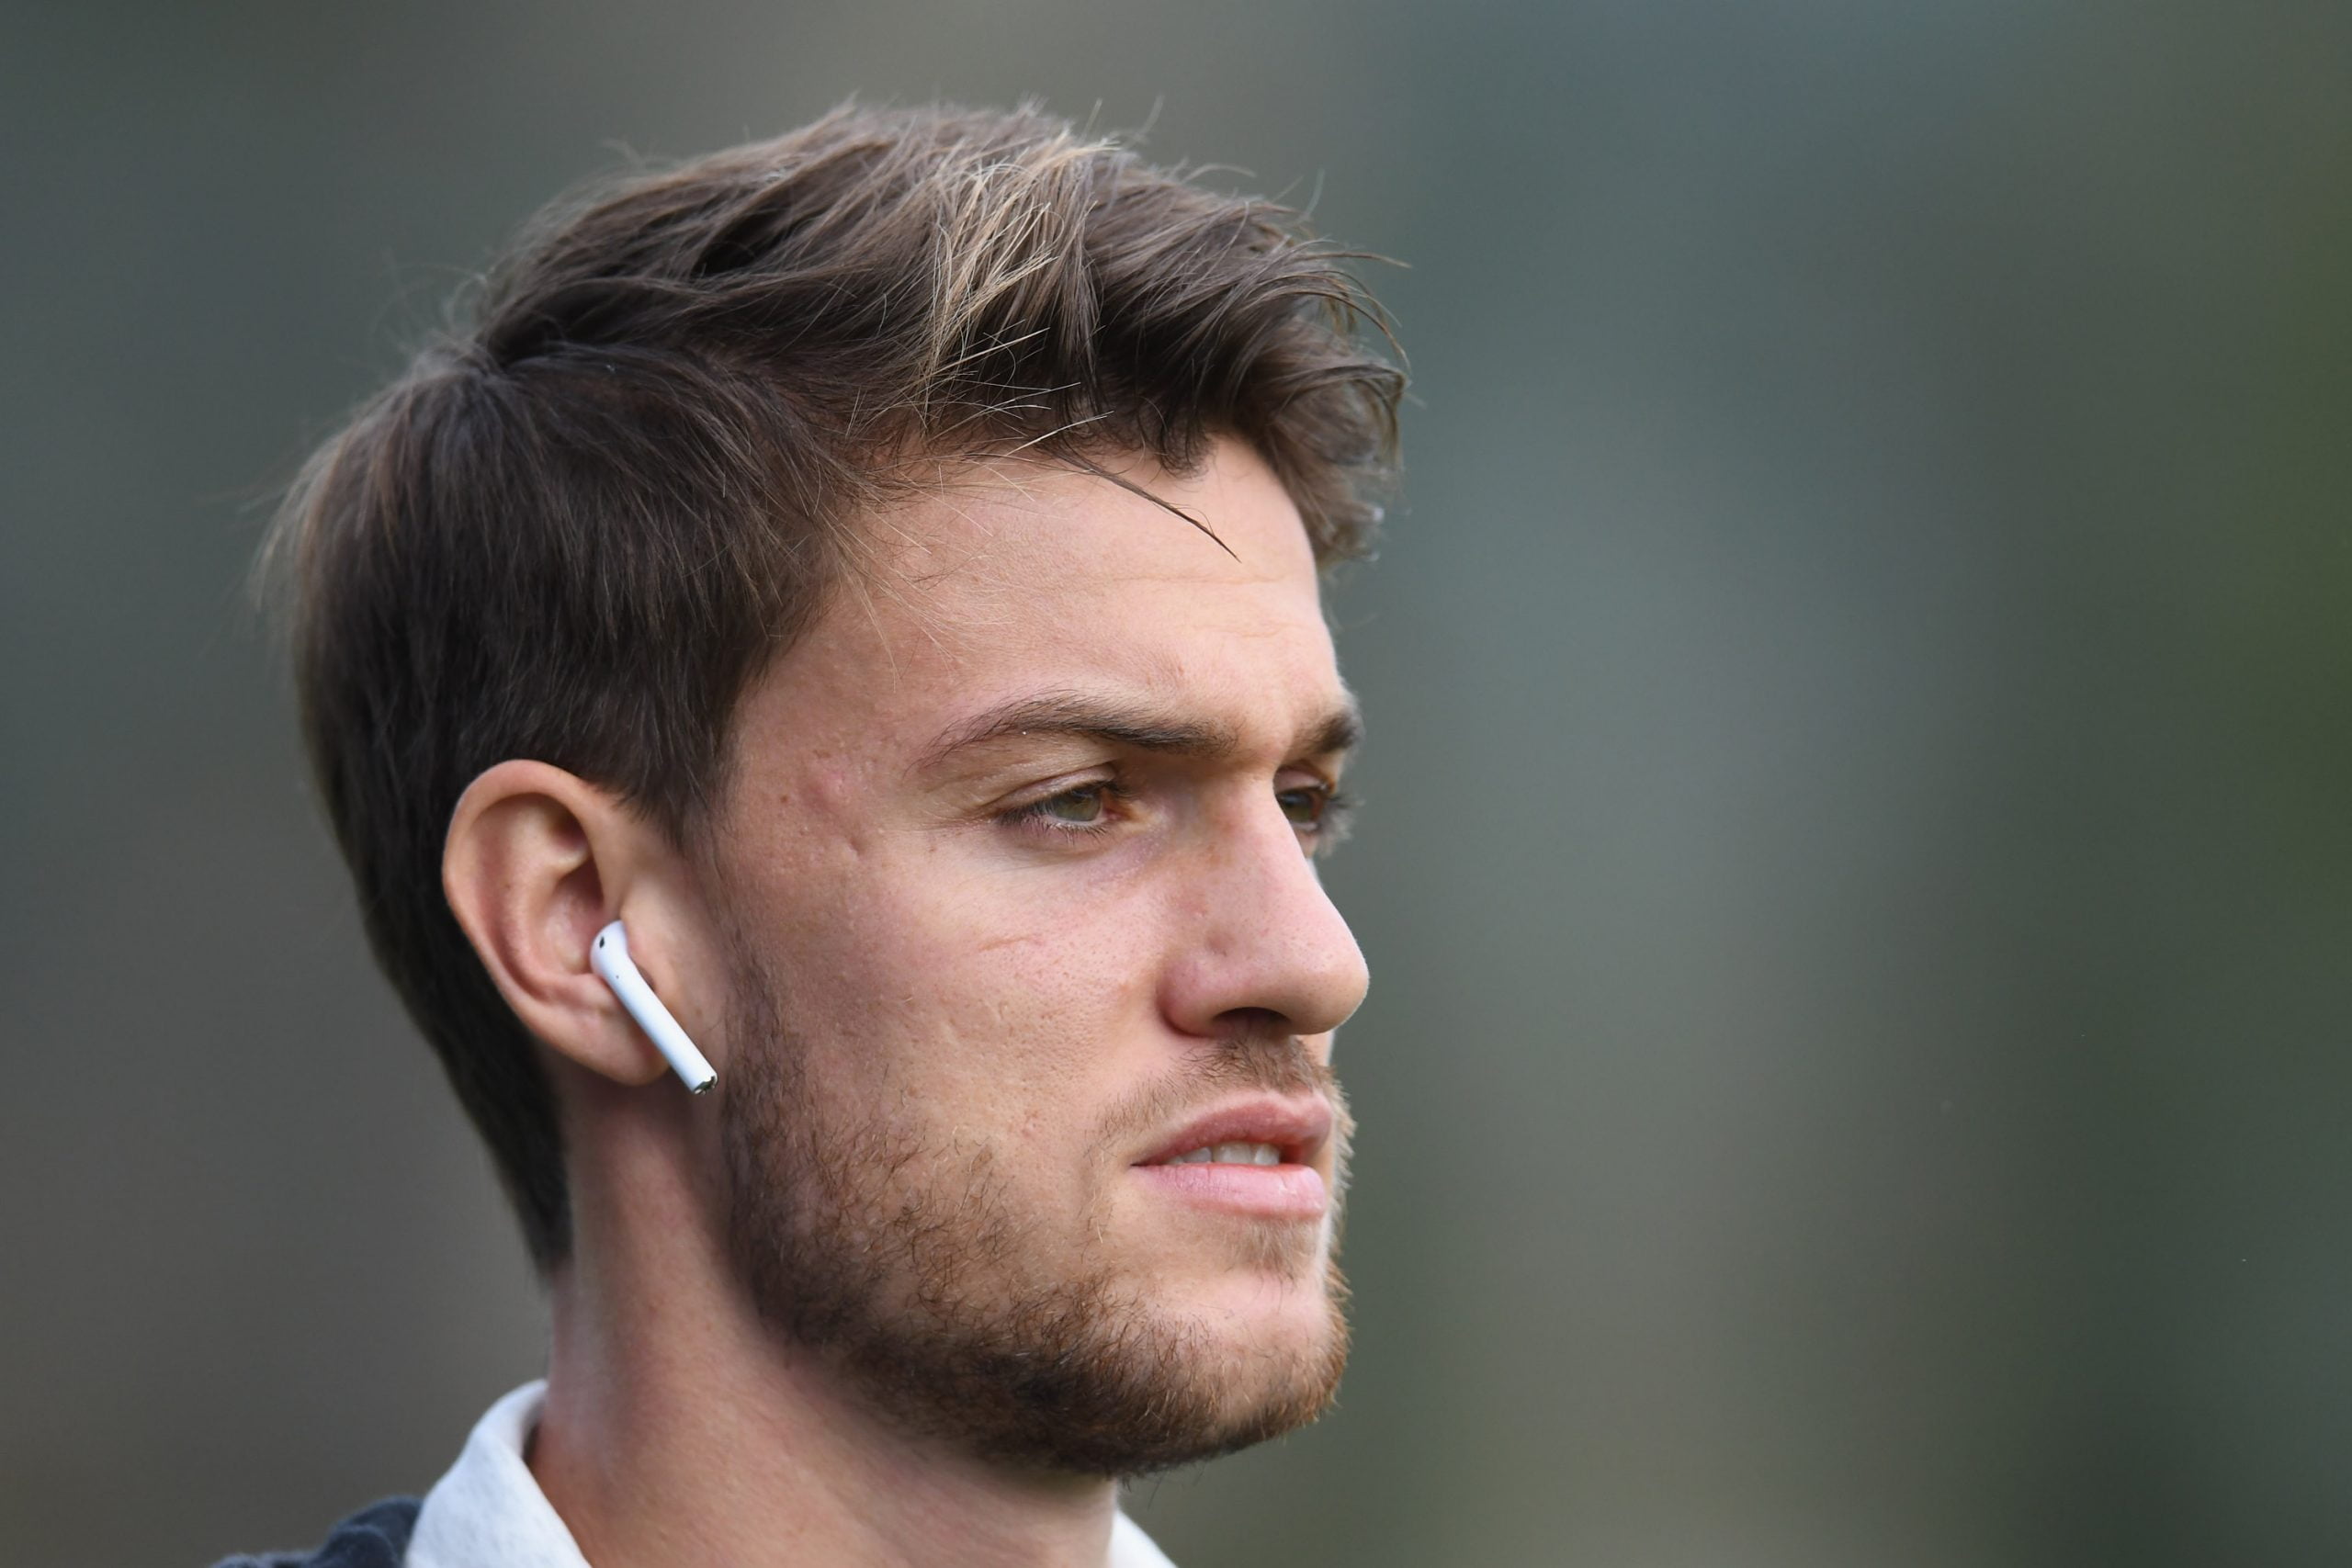 FLORENCE, ITALY - NOVEMBER 14:  Daniele Rugani of Italy looks on before training session at Centro Tecnico Federale di Coverciano on November 14, 2018 in Florence, Italy.  (Photo by Claudio Villa/Getty Images)